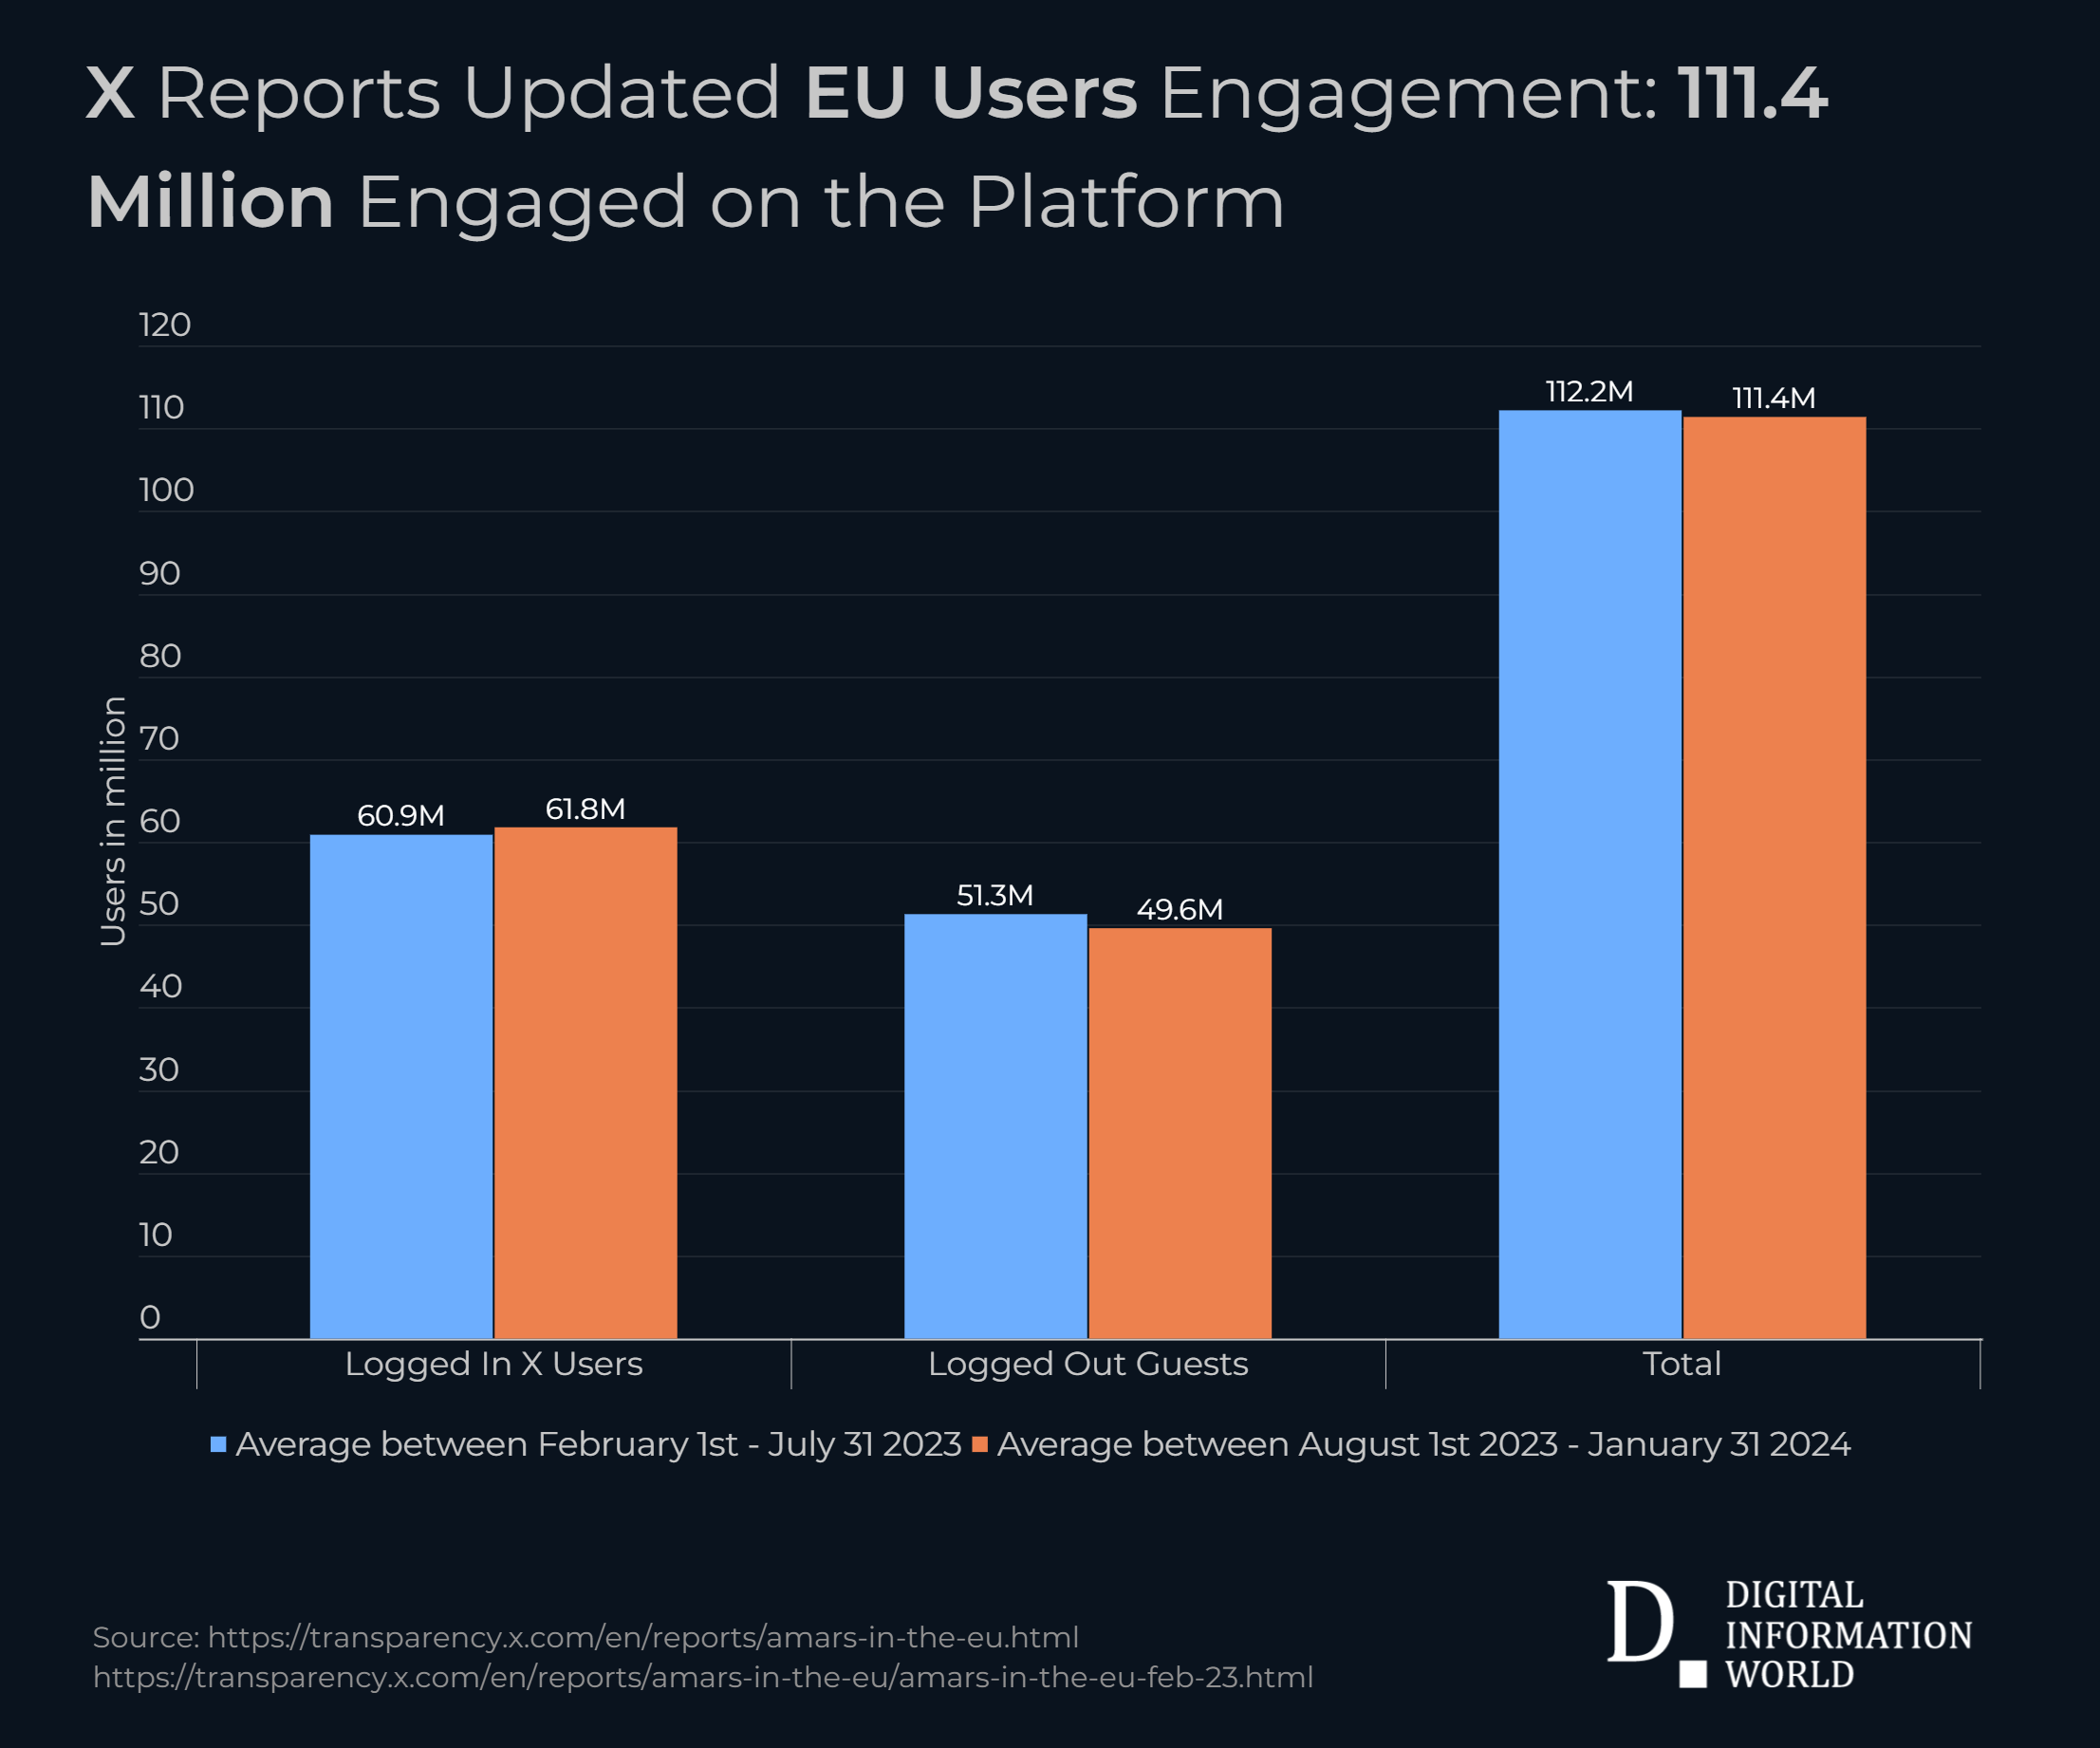 X unveils updated EU user stats, revealing 111.4 million users engaged on the platform.